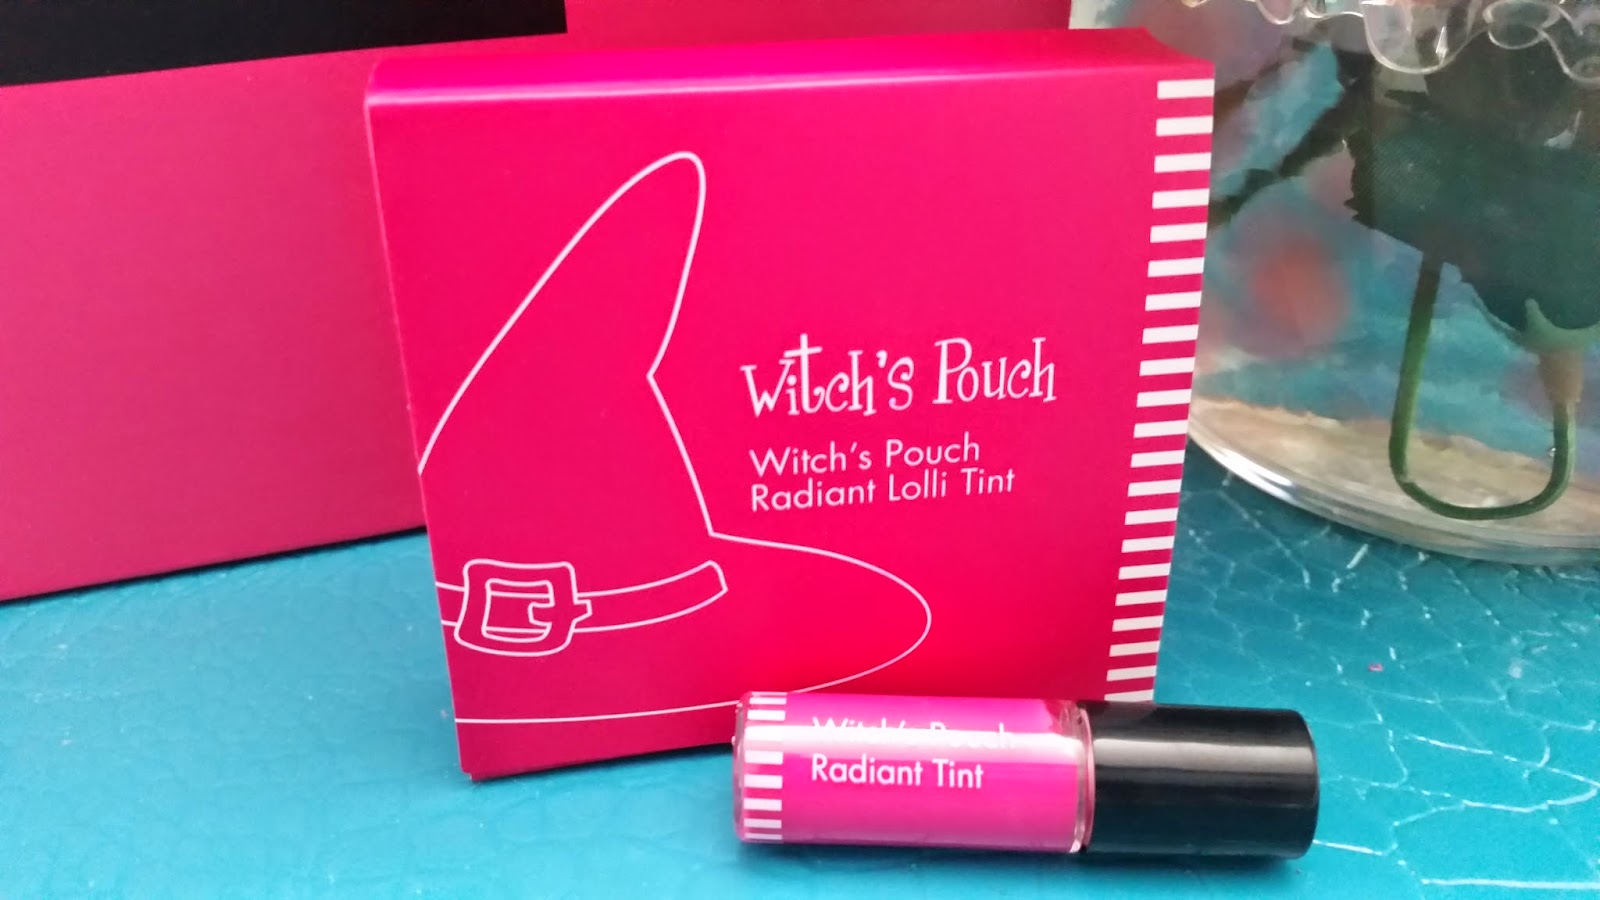 Witch's Pouch Radiant Lolli Tint